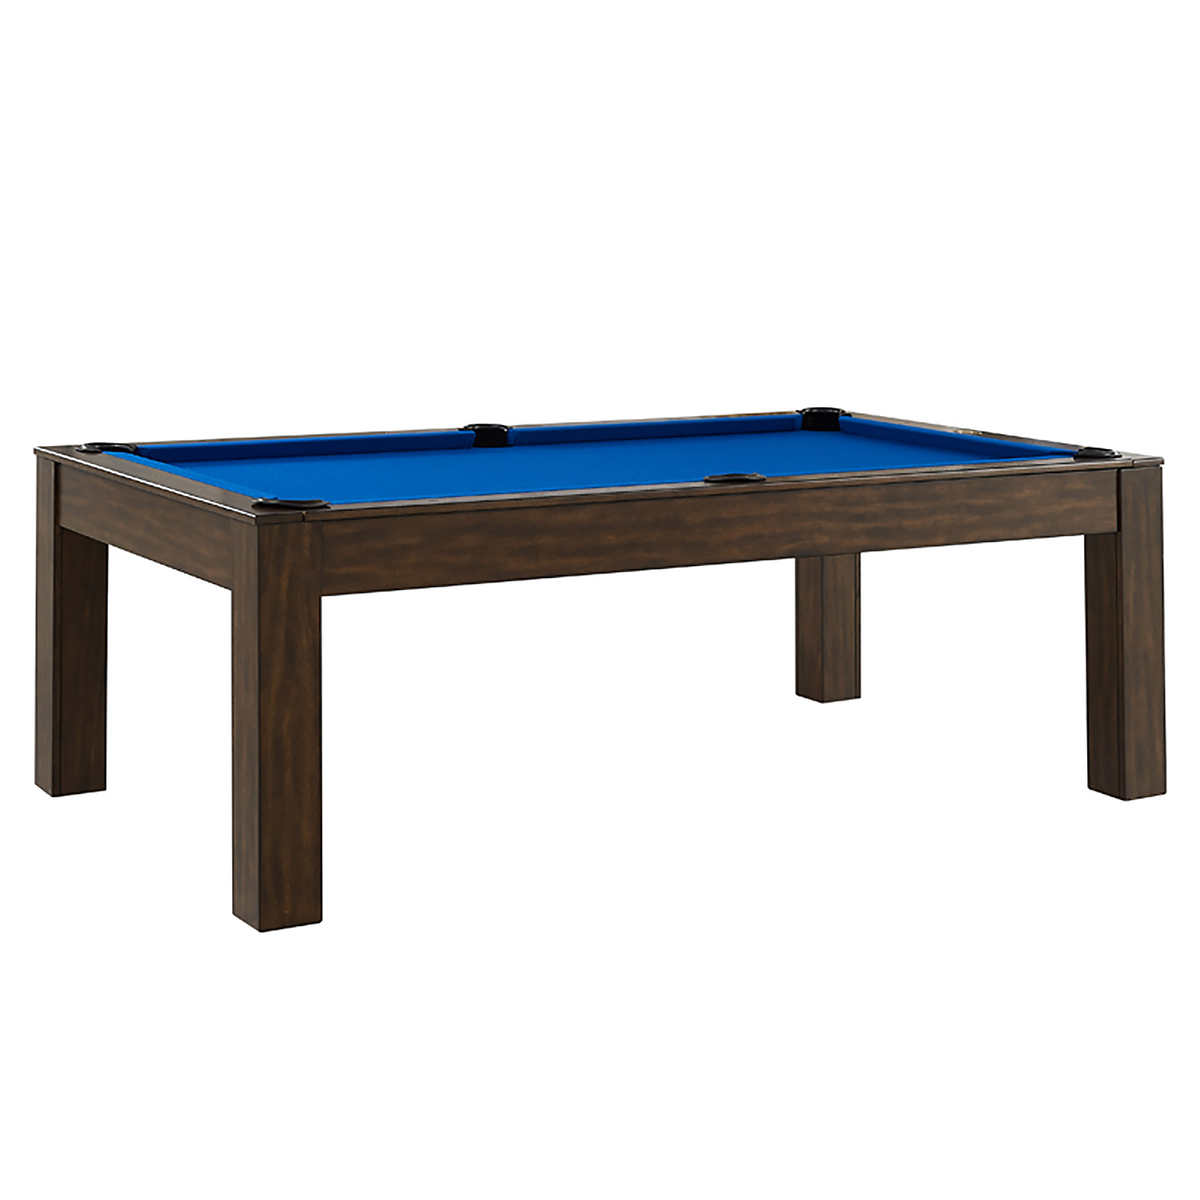 Beringer-Rivo-7ft-All-in-one-Slate-Pool-Table-with-Dining-top-and-Table-Tennis.jpg